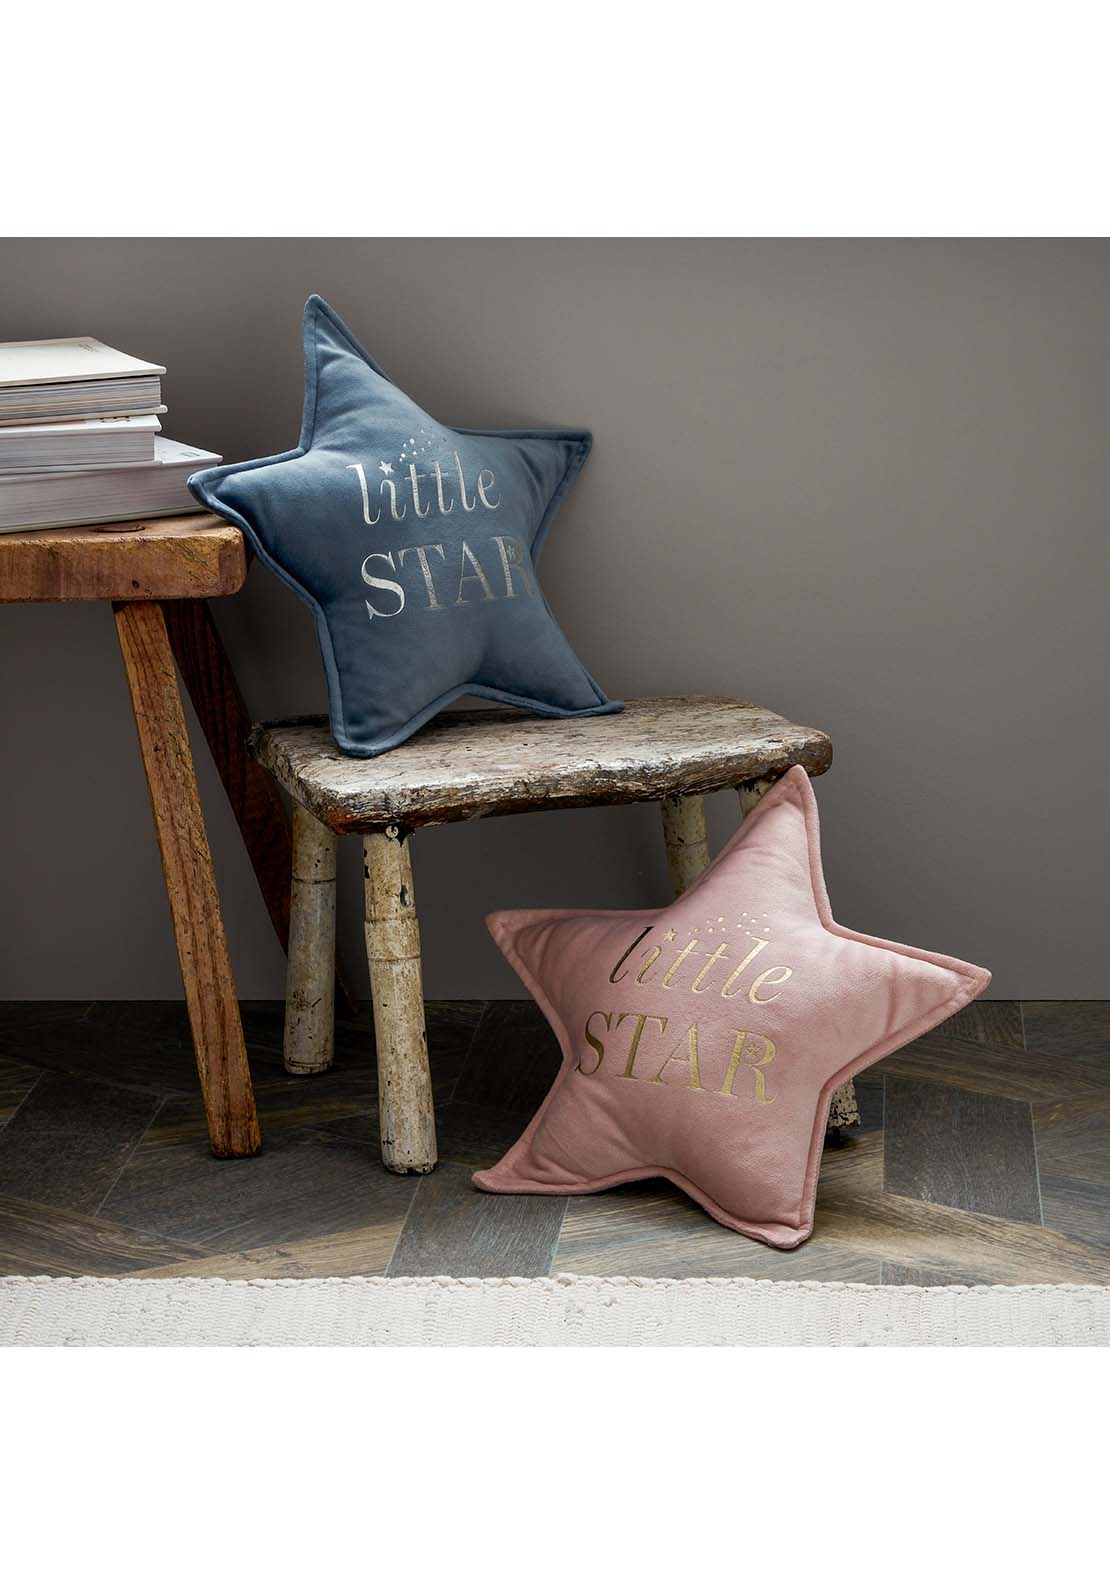 The Home Collection Little Star Velvet Cushion 30cm - Blue 3 Shaws Department Stores